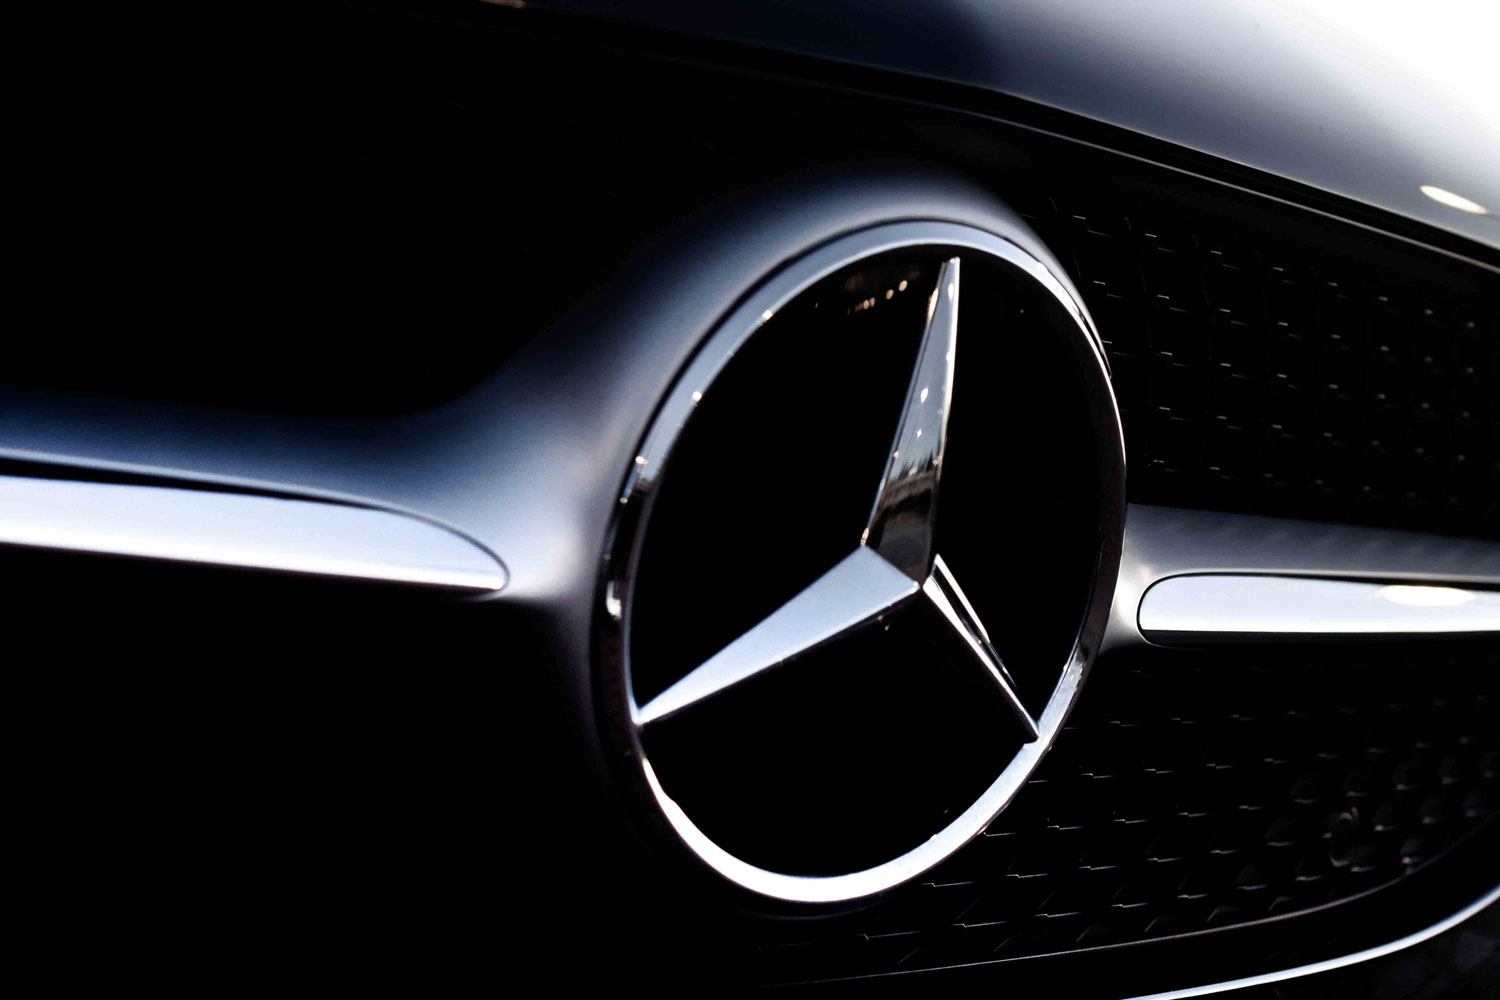 Mercedes extended warranty from WarrantyDirect - get your warranty now